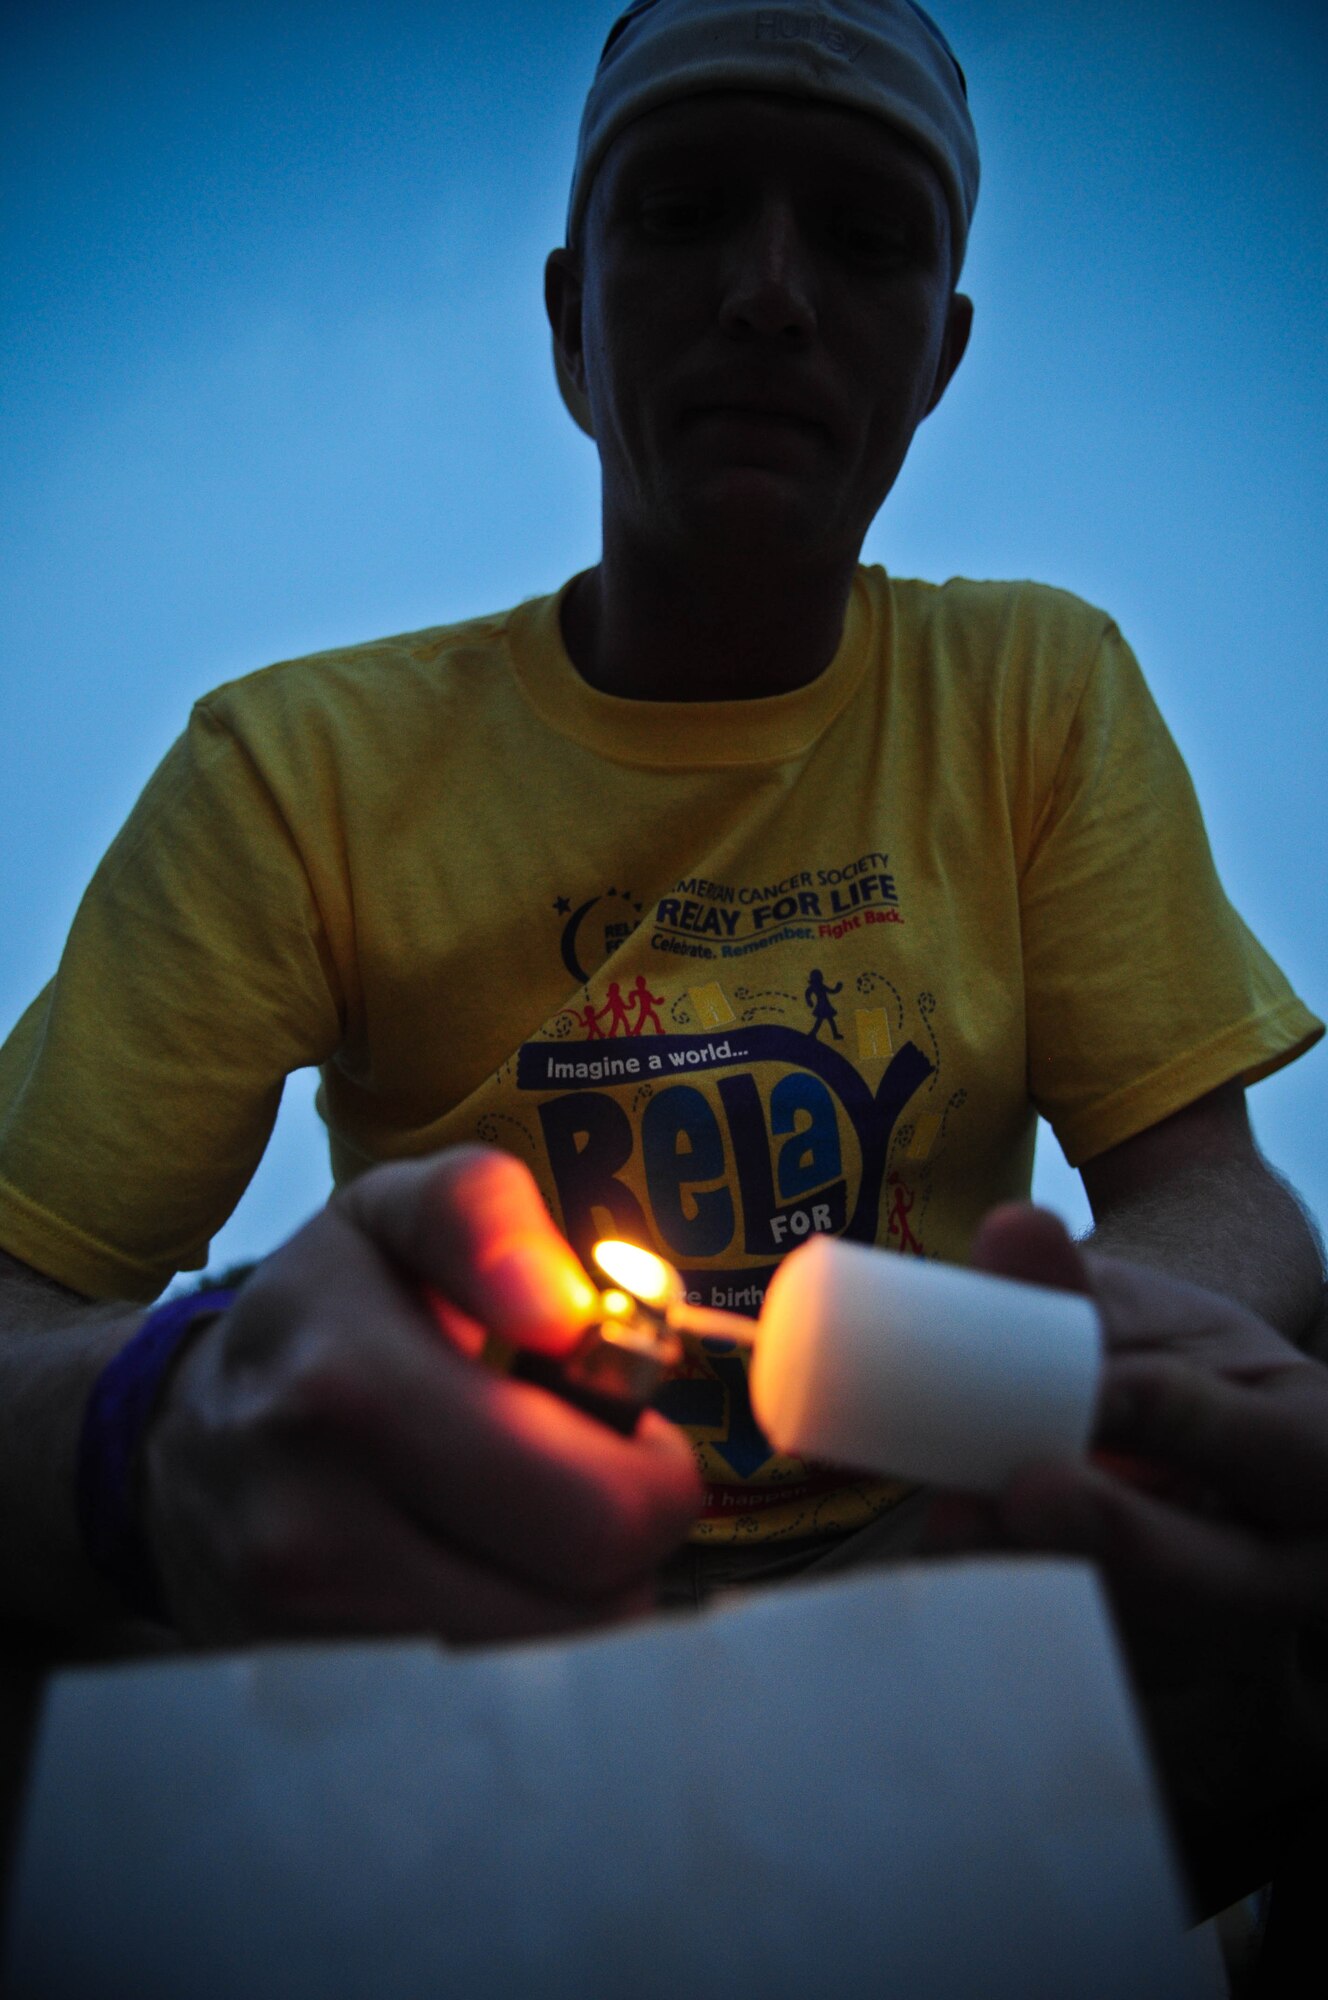 Staff Sgt. Stephen Day, Relay for Life fundraising coordinator, lights a candle during the luminary ceremony Saturday, May 8, 2010 at Arkadas Park at Incirlik Air Base, Turkey during the Relay for Life event.  The luminary ceremony is held to honor cancer survivors and those who have passed away.  (U.S. Air Force photo/Senior Airman Ashley Wood)